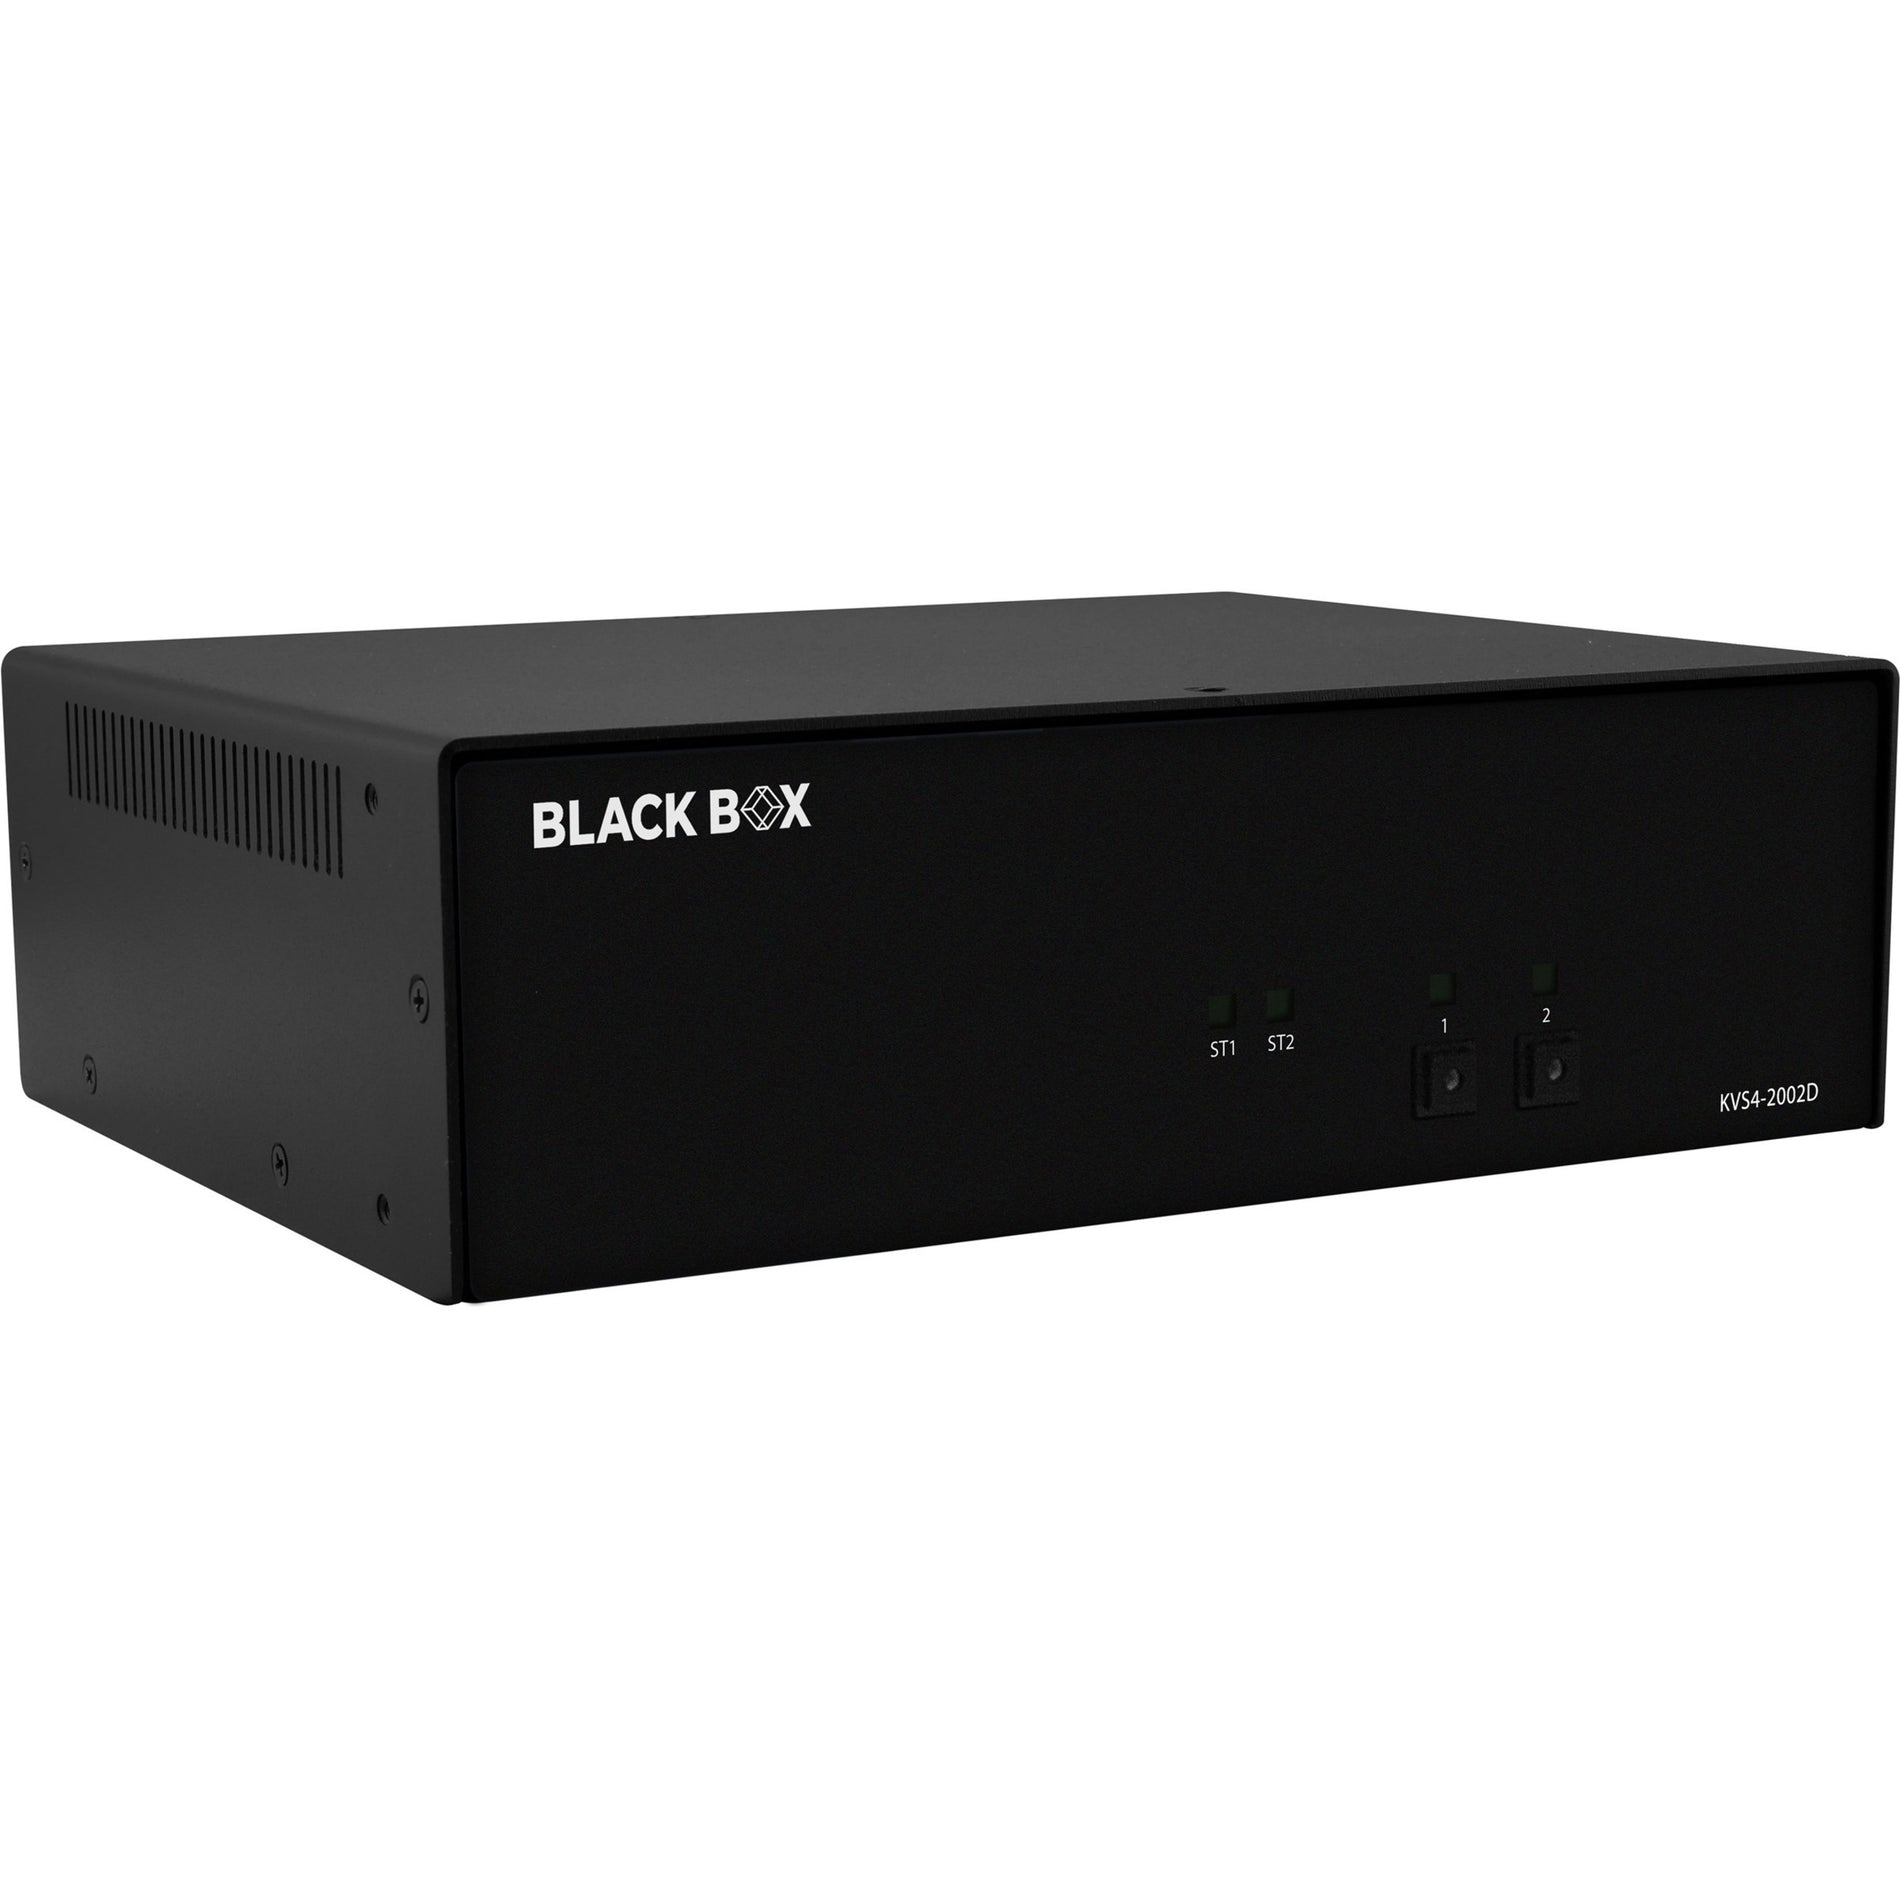 Black Box KVS4-2002D Secure KVM Switch - DVI-I, 2 Computers Supported, 2 Local Users Supported